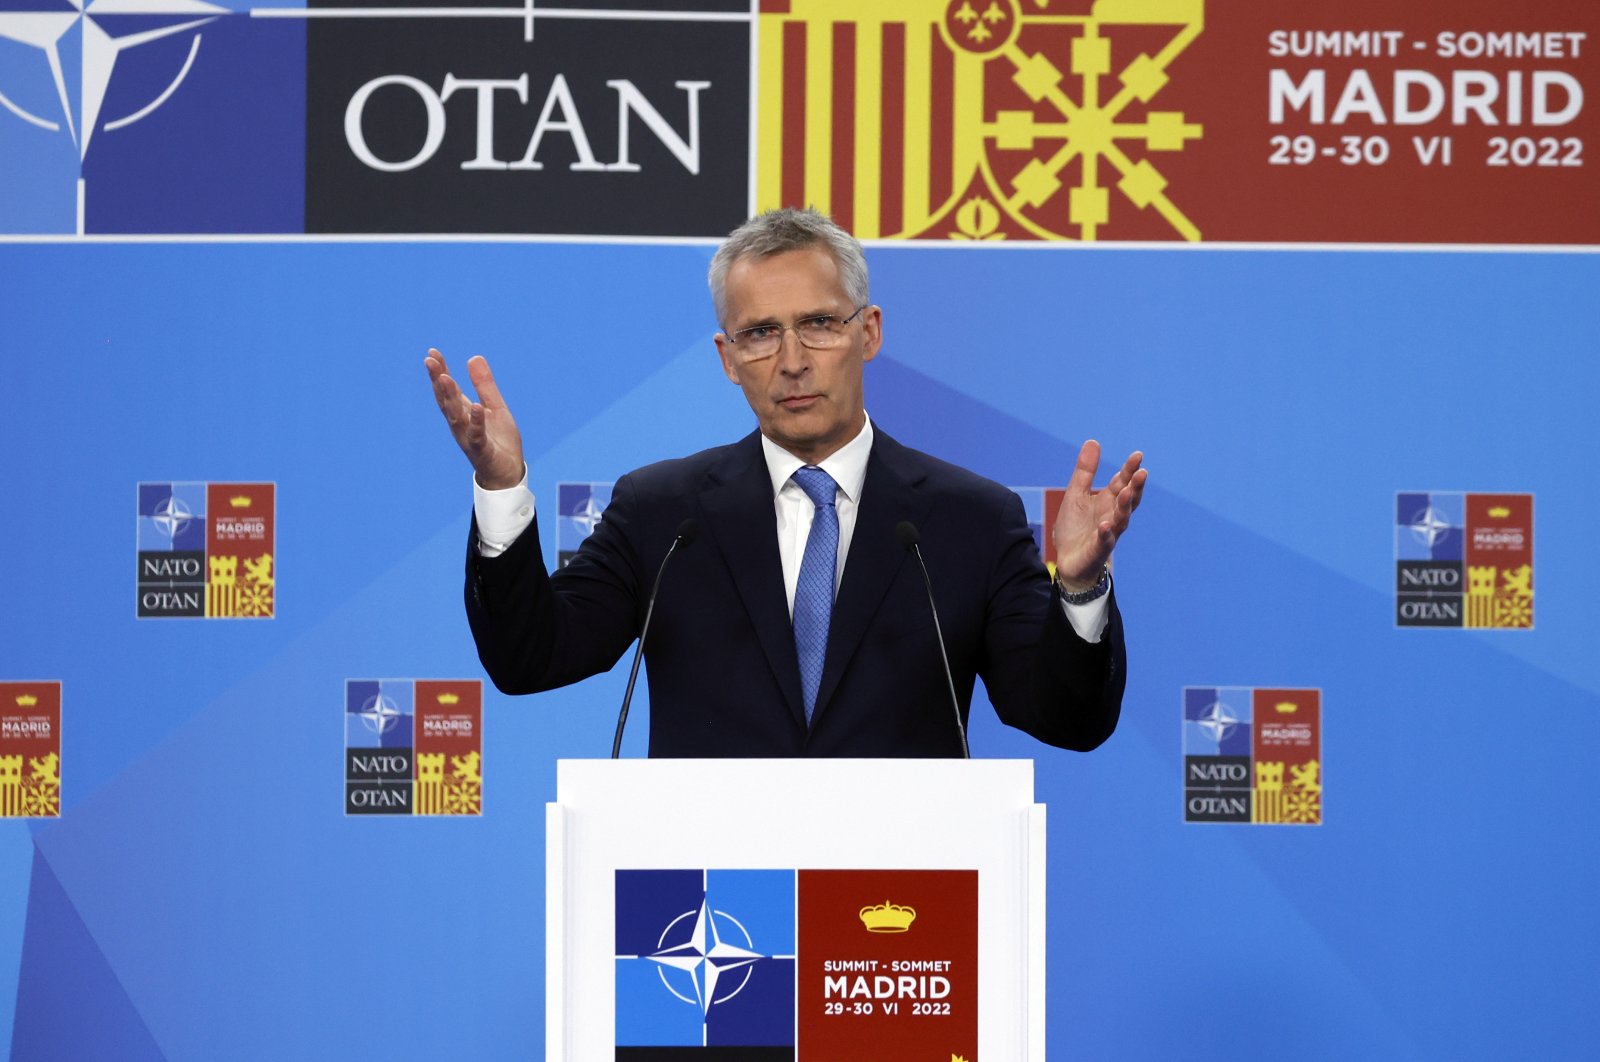 NATO Secretary-General Jens Stoltenberg gestures during a press conference on the first day of the NATO summit in Madrid, Spain, June 29, 2022. (EPA)